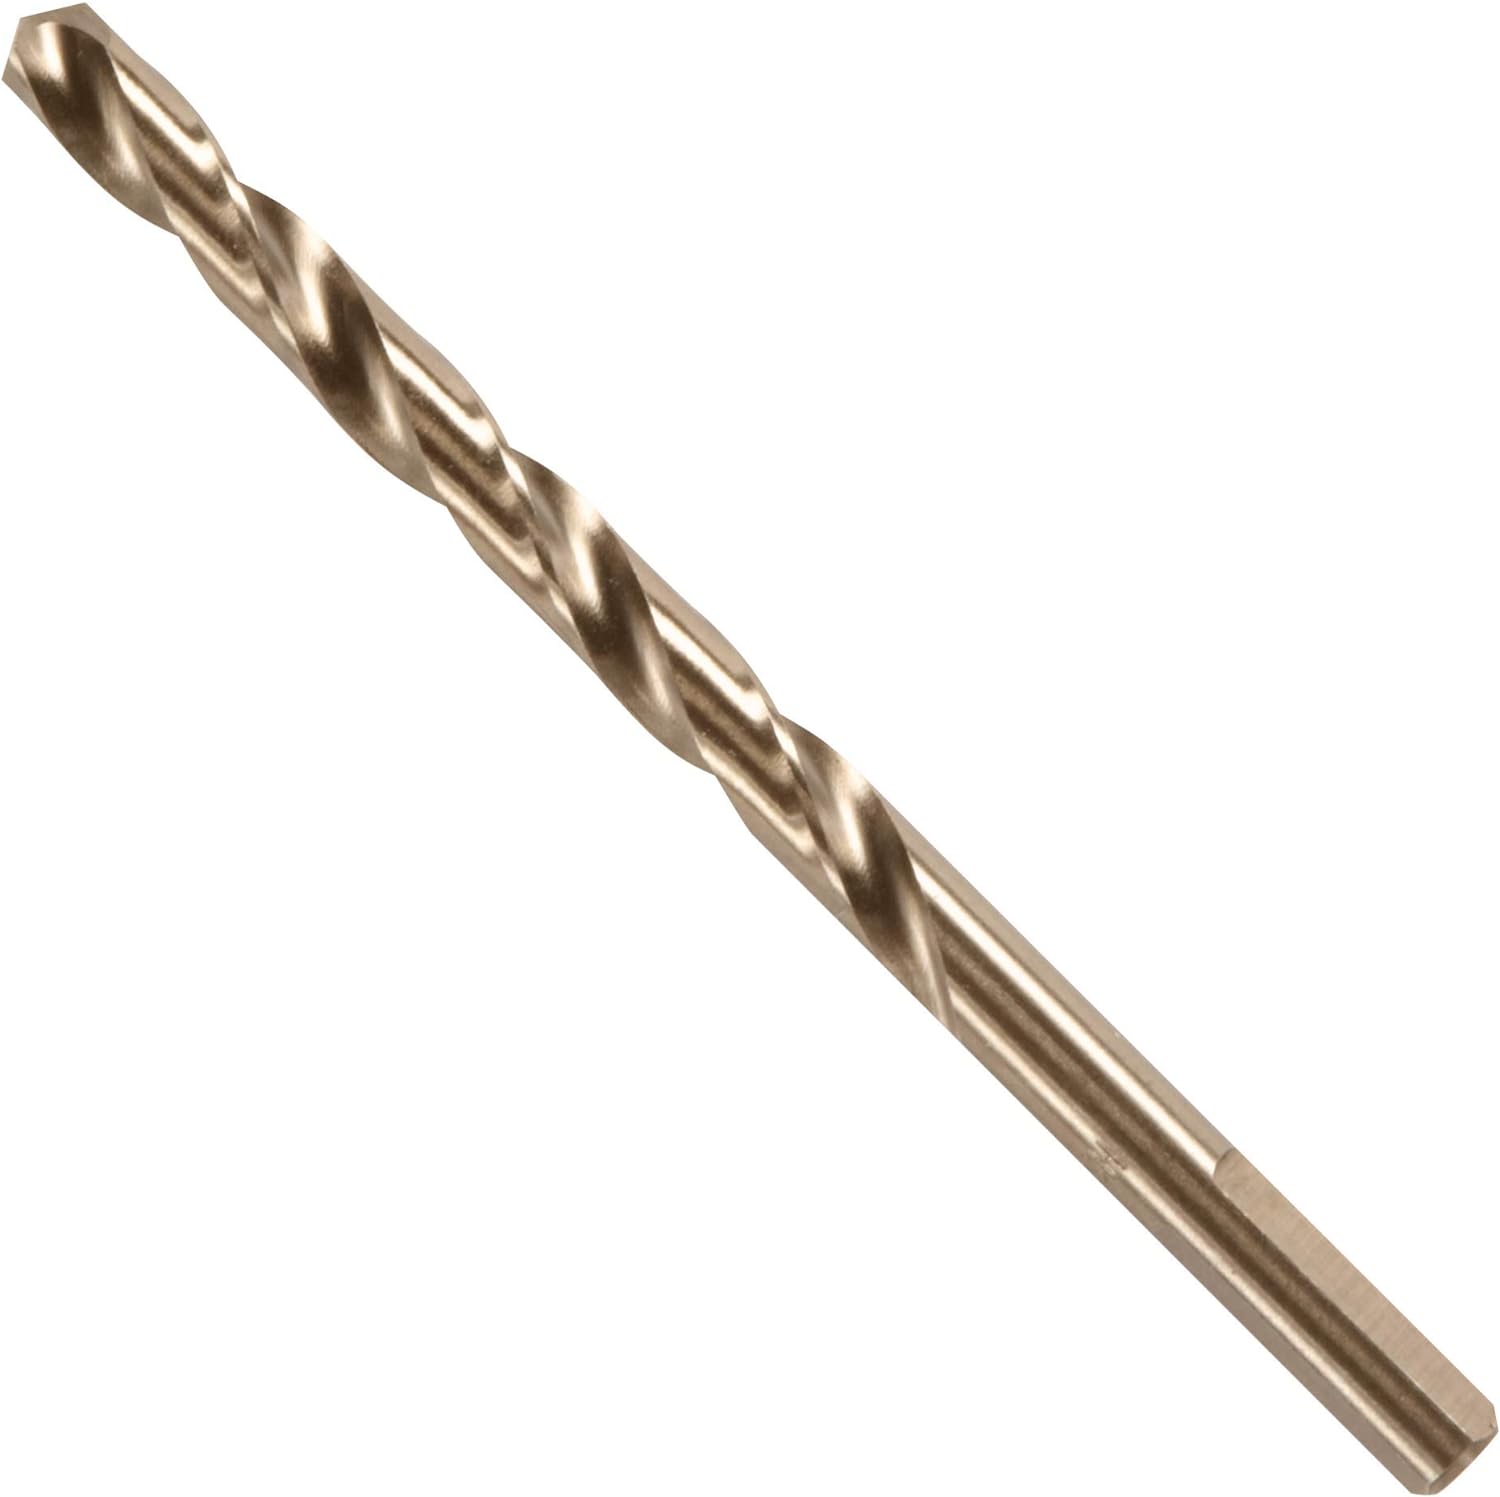 Bosch co2143b m42 cobalt 1/4 x 4" drill bit $2.89 at Amazon +other sizes available